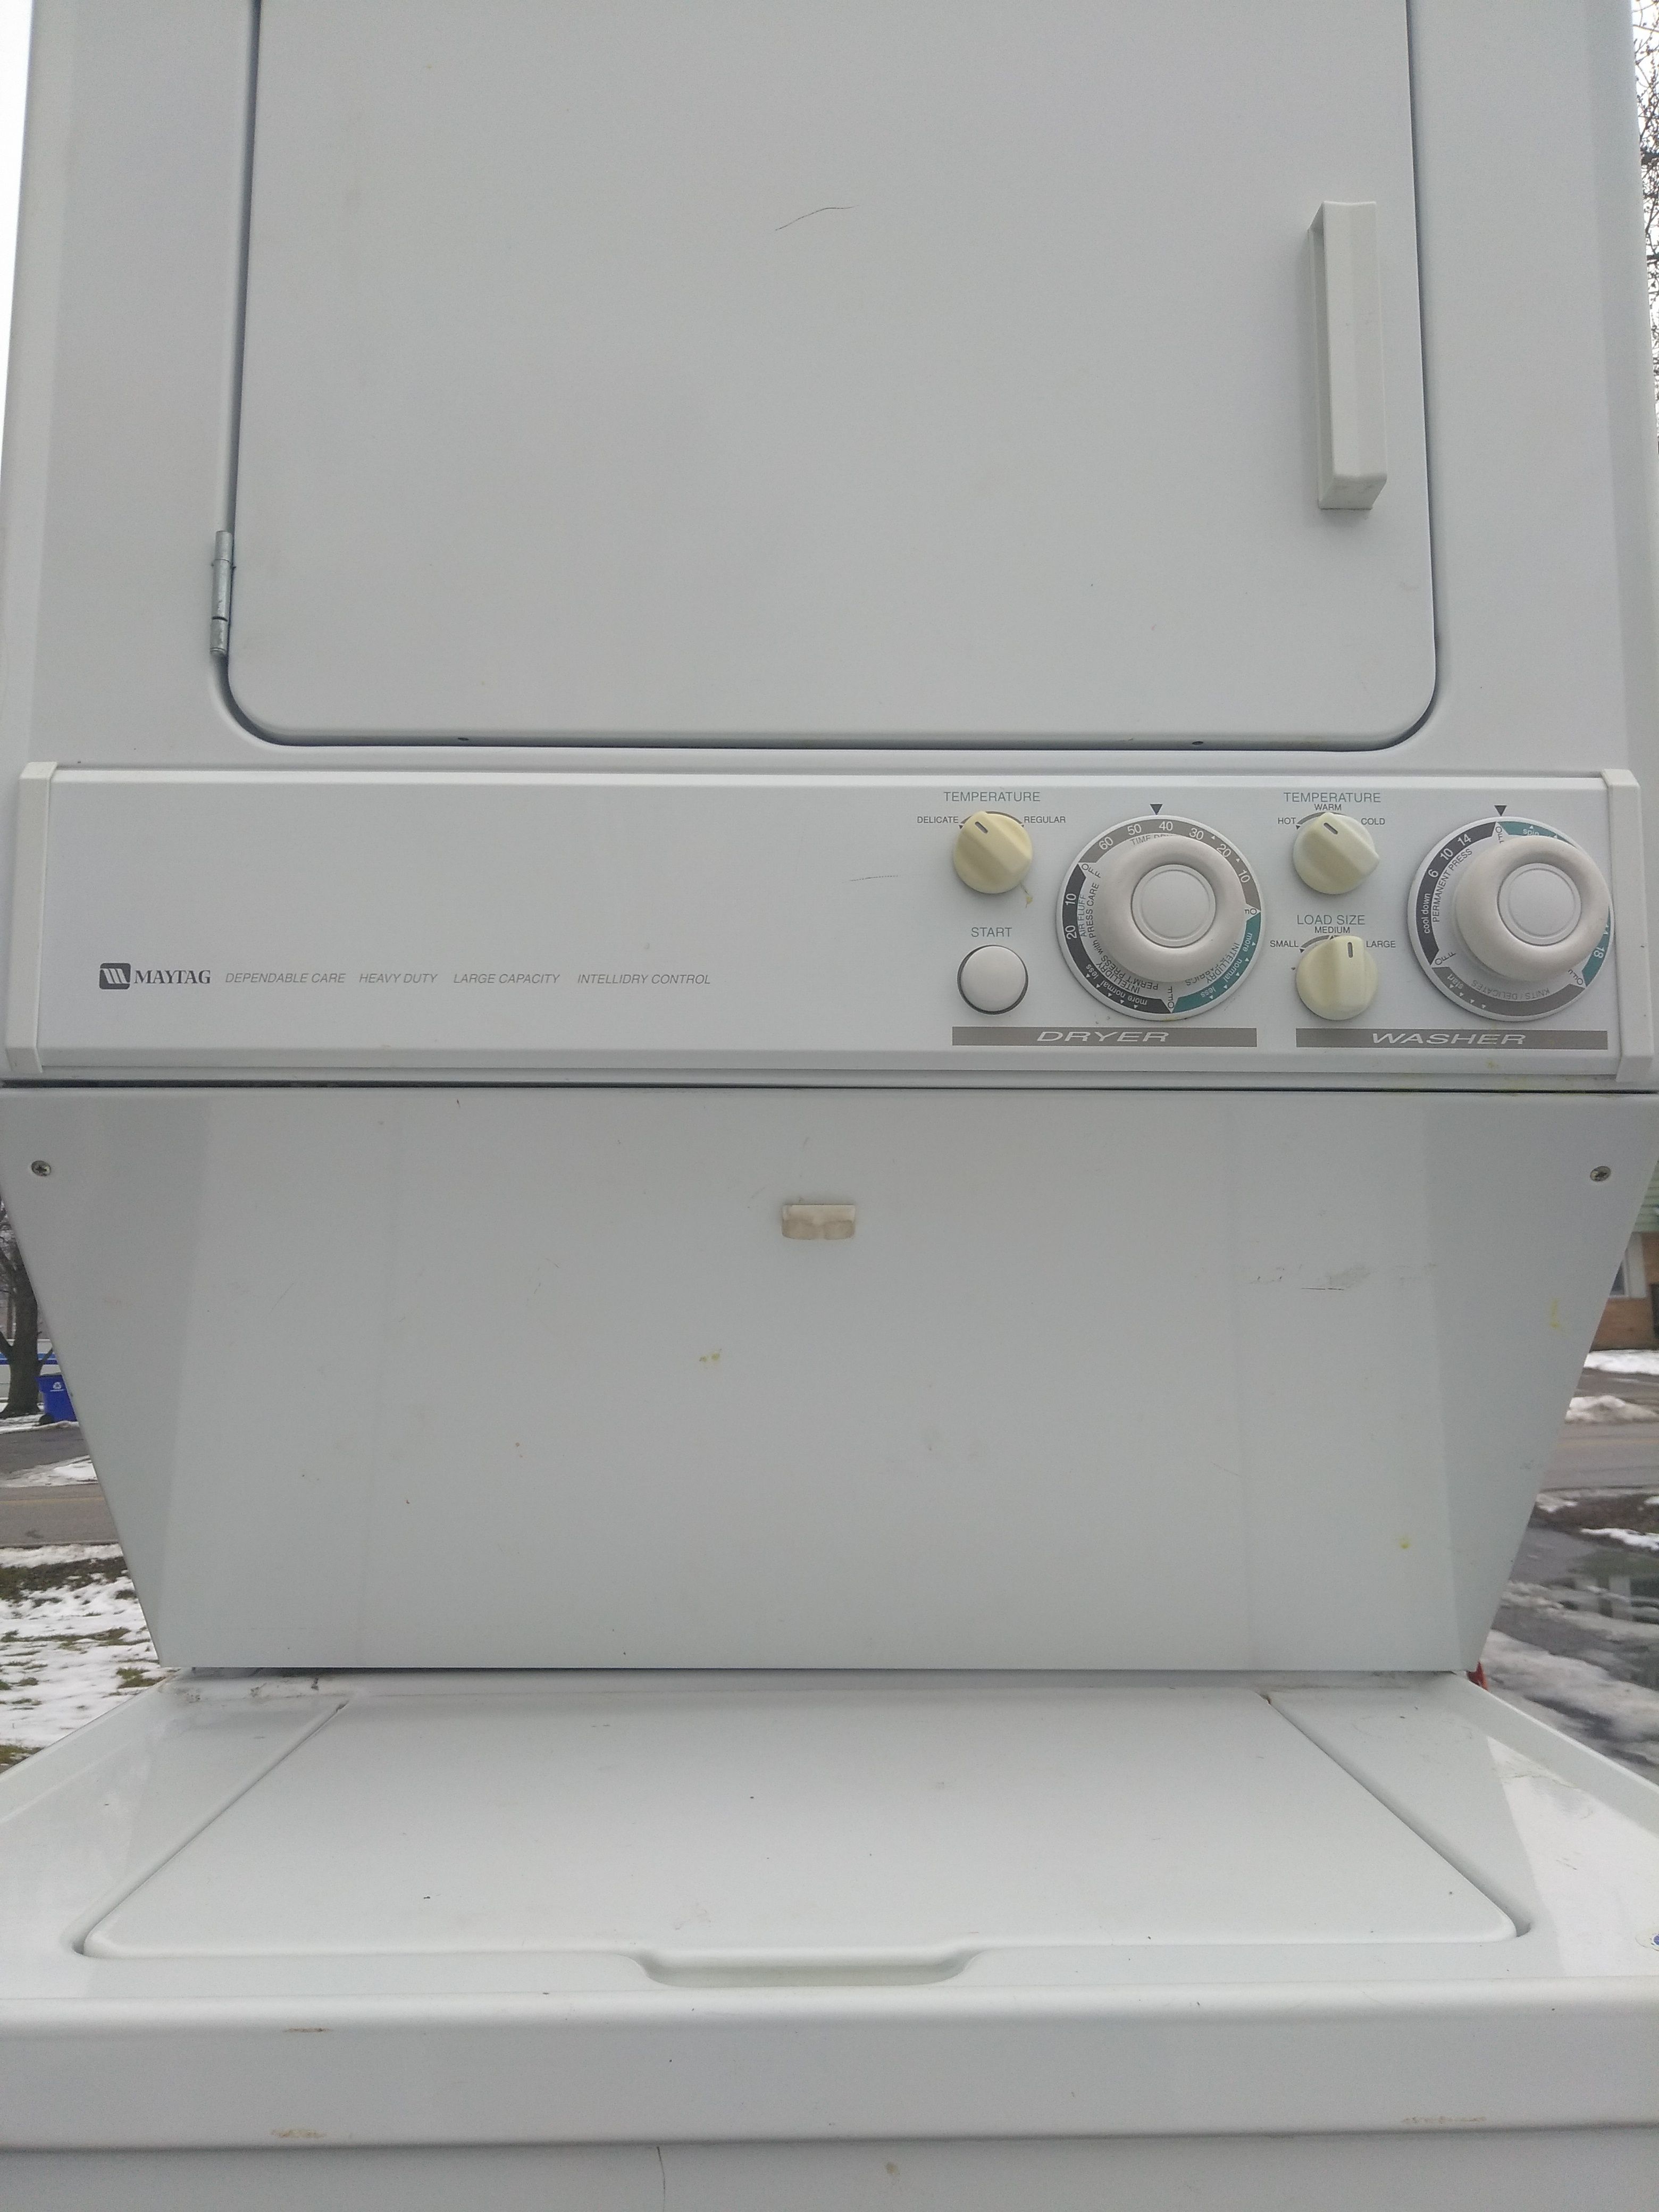 Maytag Stack Washer And Electric Dryer